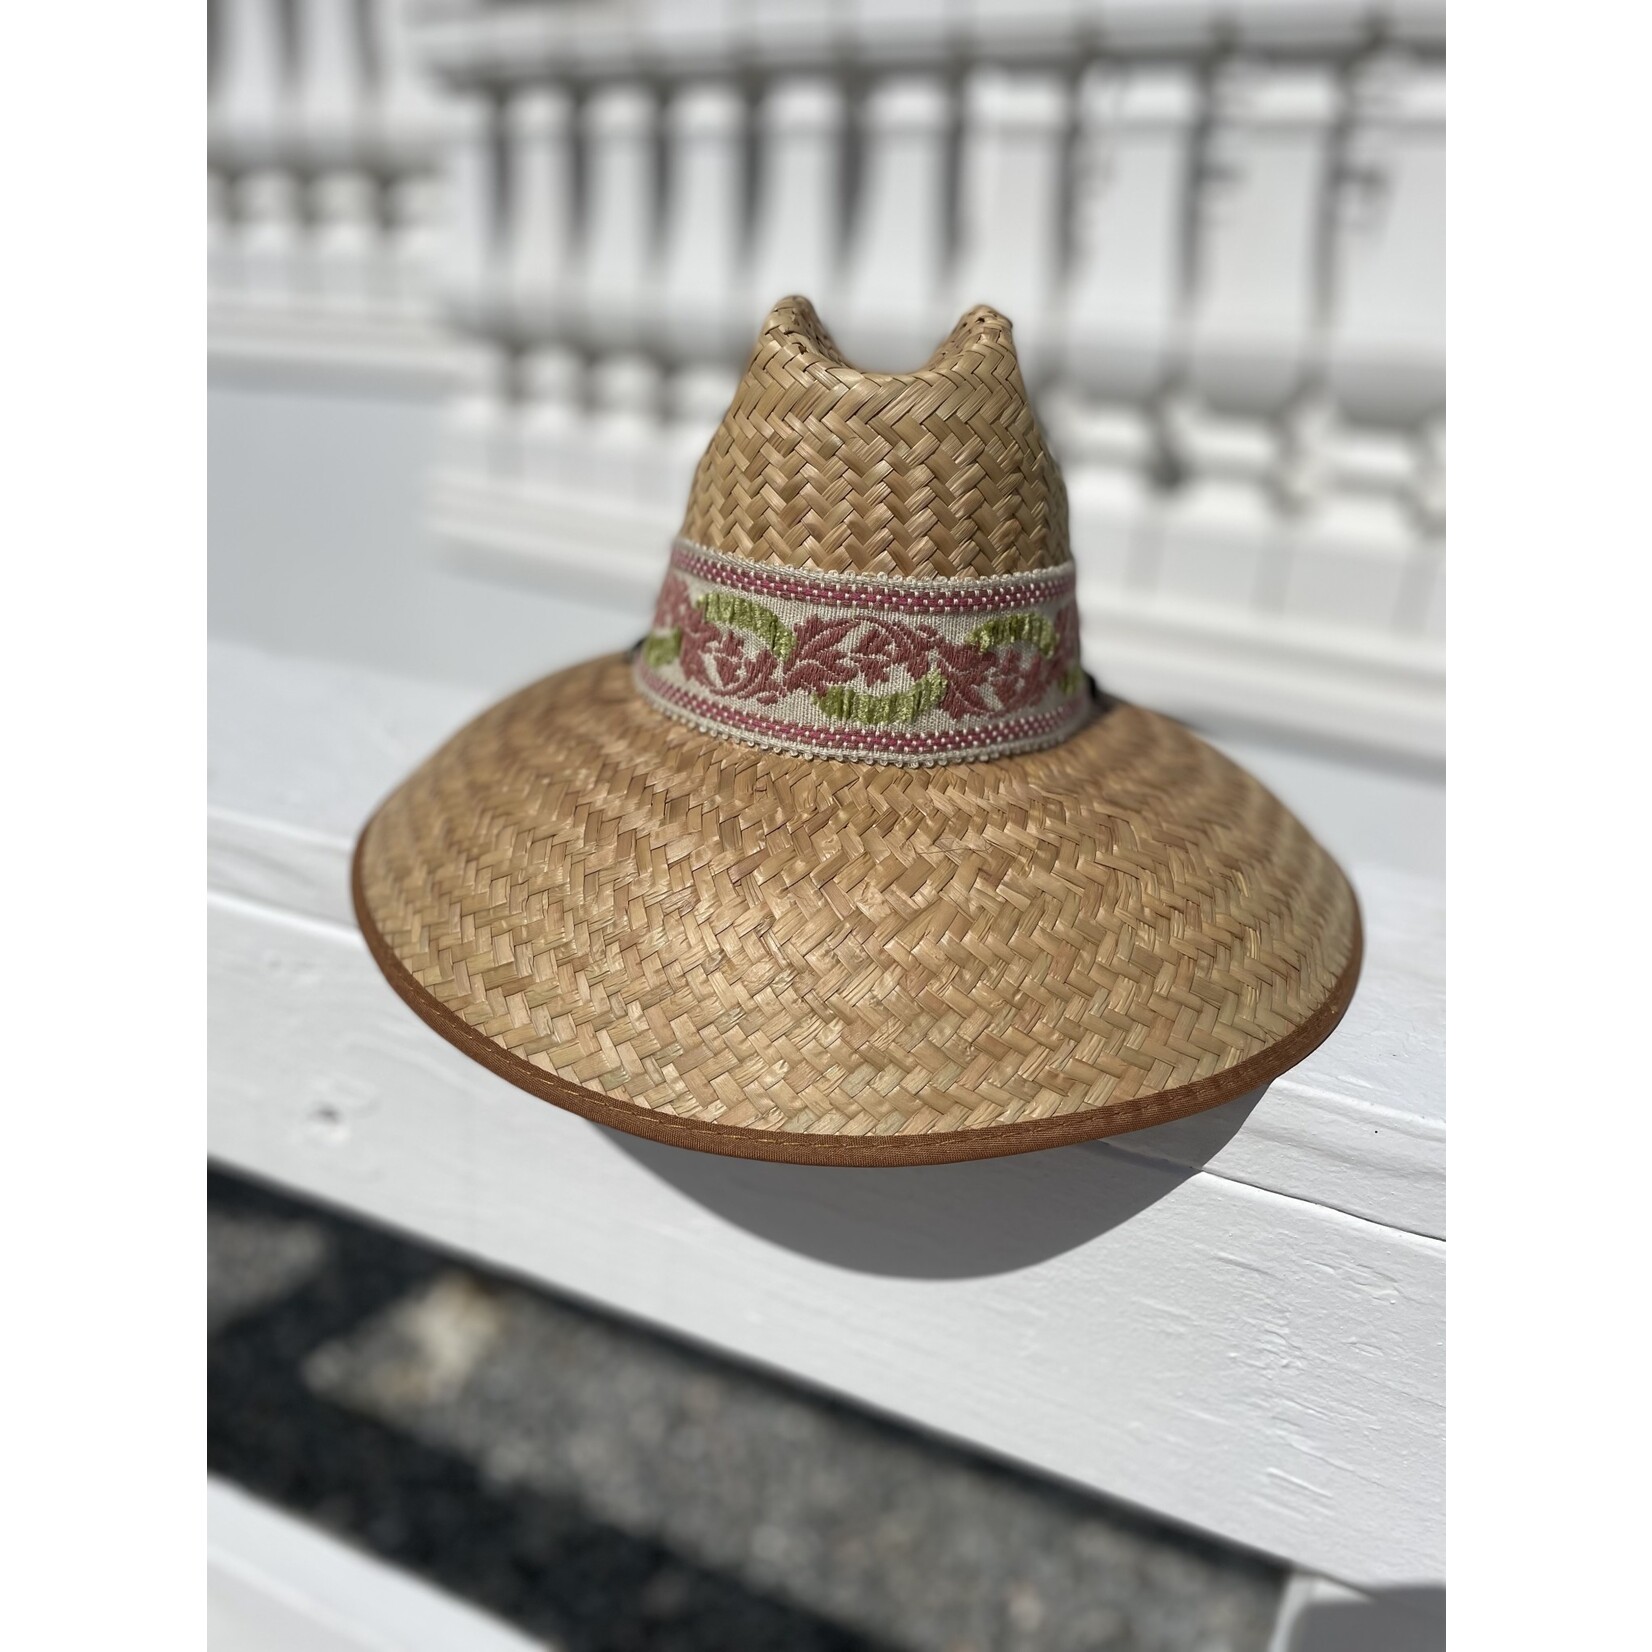 Dragonfly Designs Dragonfly Designs Sun Hat with Horse Hair hand braided adjustable slide for windy days, fits most, sizing strips available.